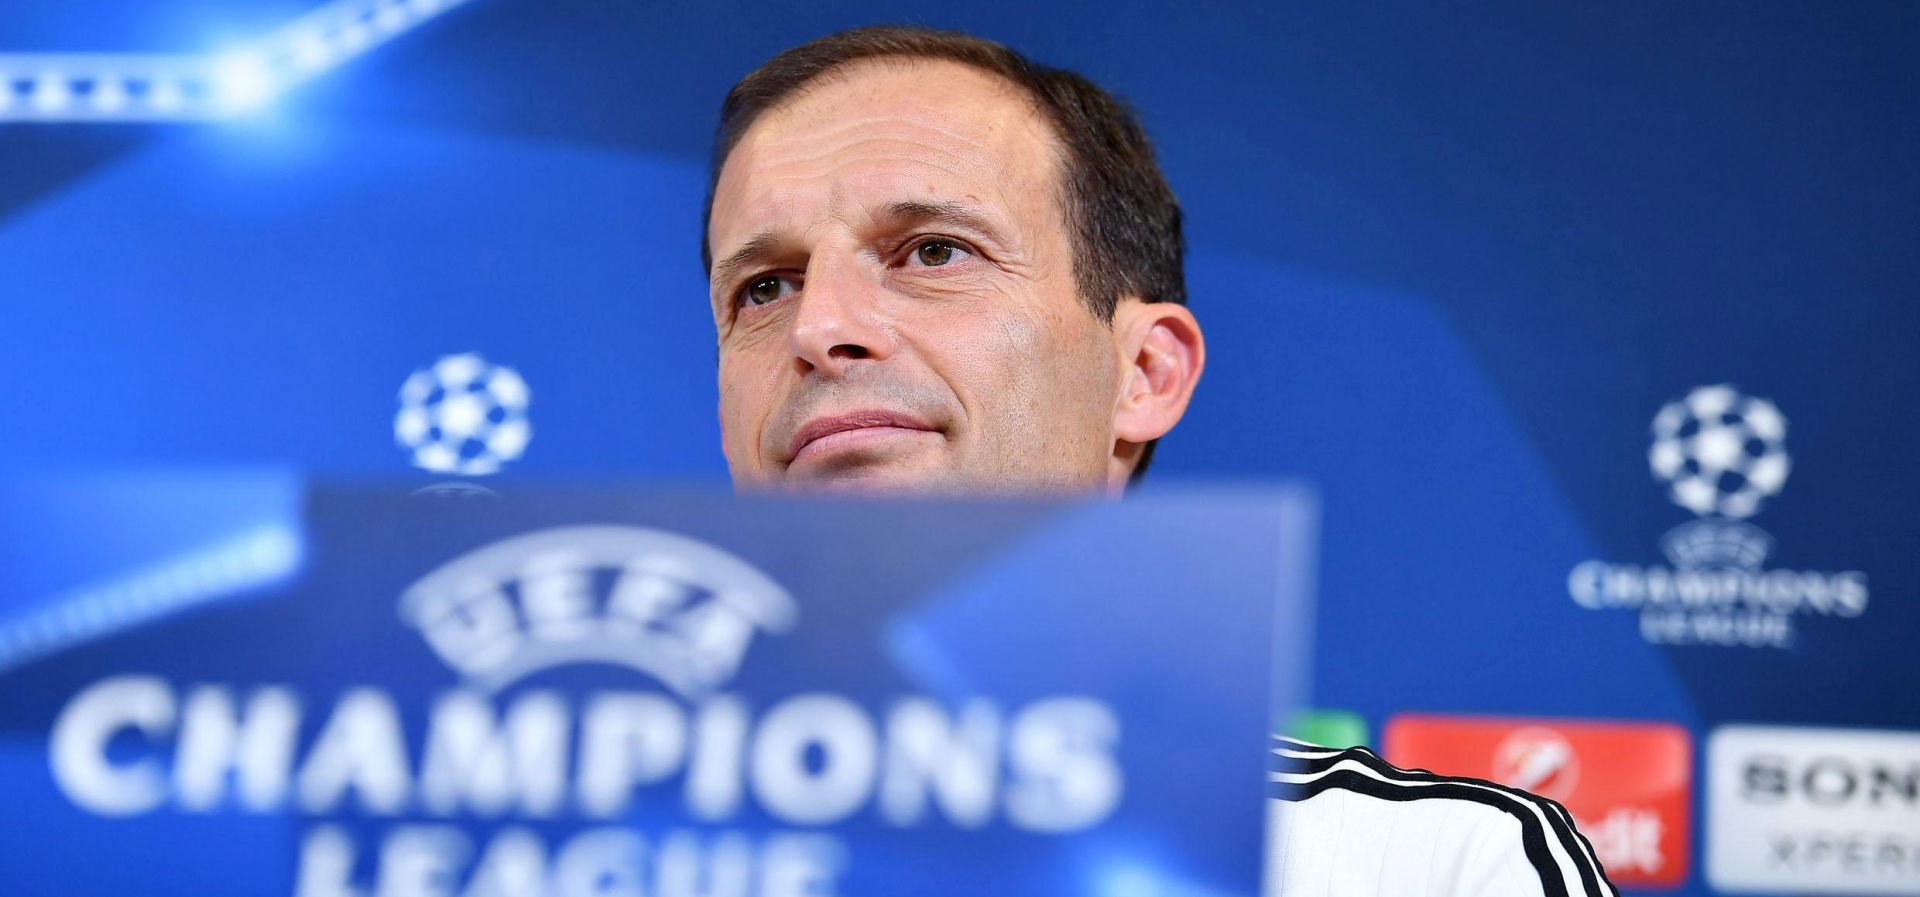 epa05951194 Juventus' coach Massimiliano Allegri attends a press conference at the Juventus Stadium in Turin, Italy, 08 May 2017. Juventus FC will play against AS Monaco in the UEFA Champions League, semi final, second leg soccer match on 09 May 2017.  EPA/ALESSANDRO DI MARCO